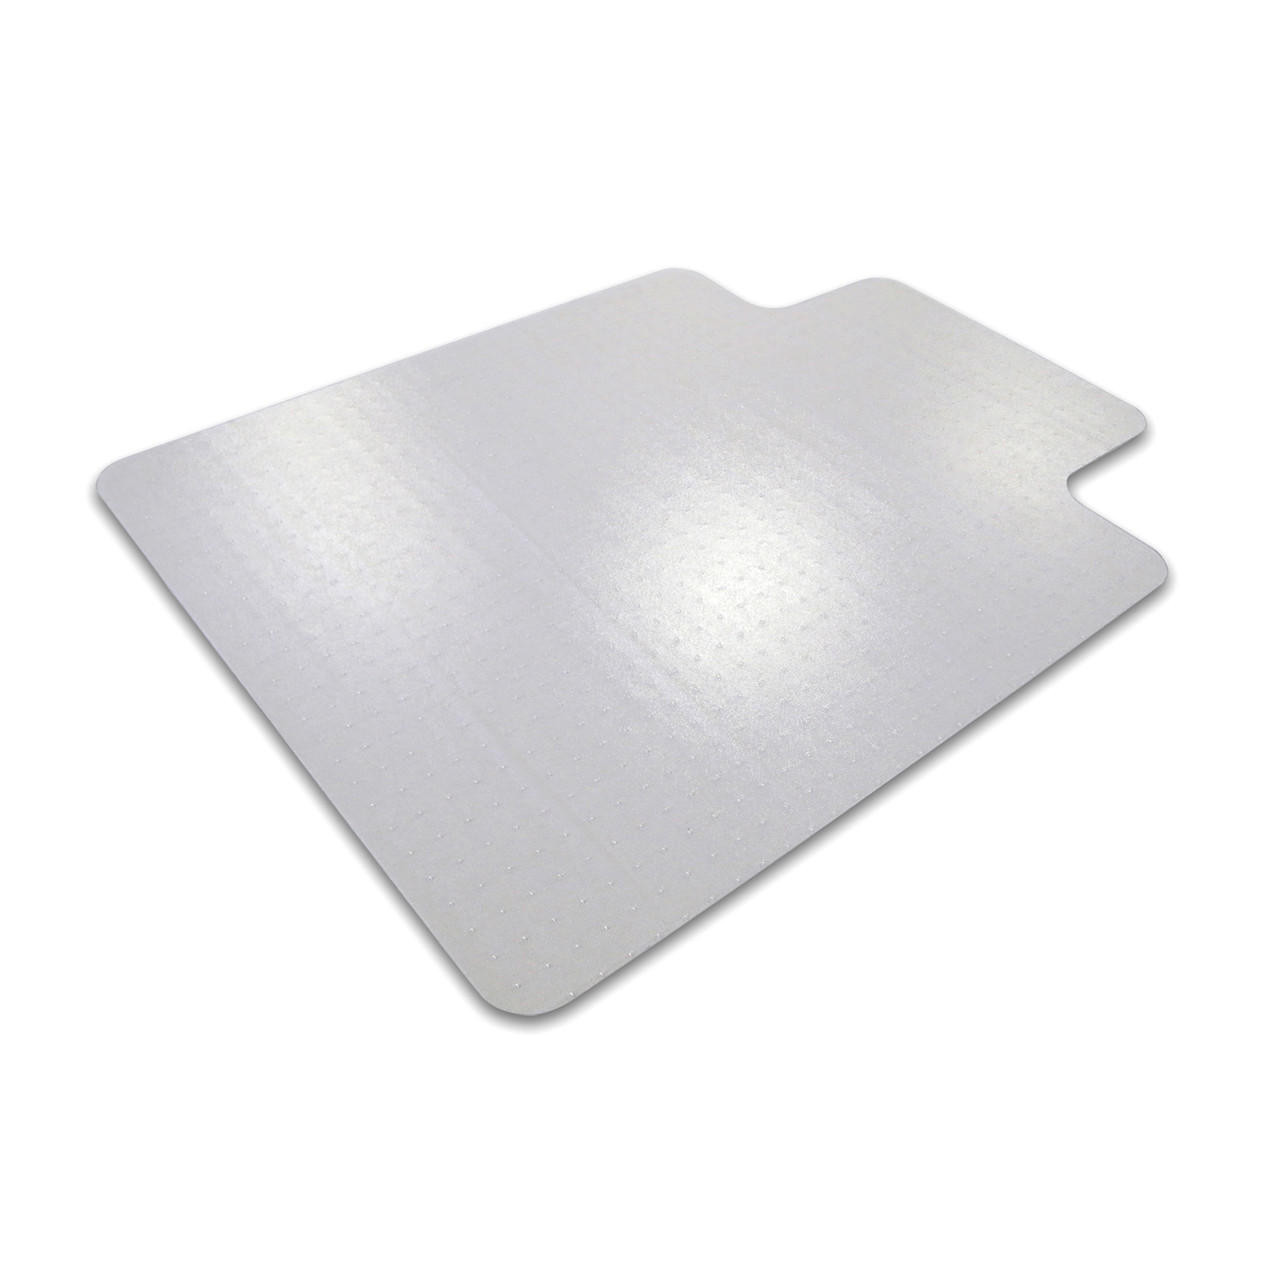 Marvelux Polycarbonate (PC) Lipped Chair Mat for Low, Standard and